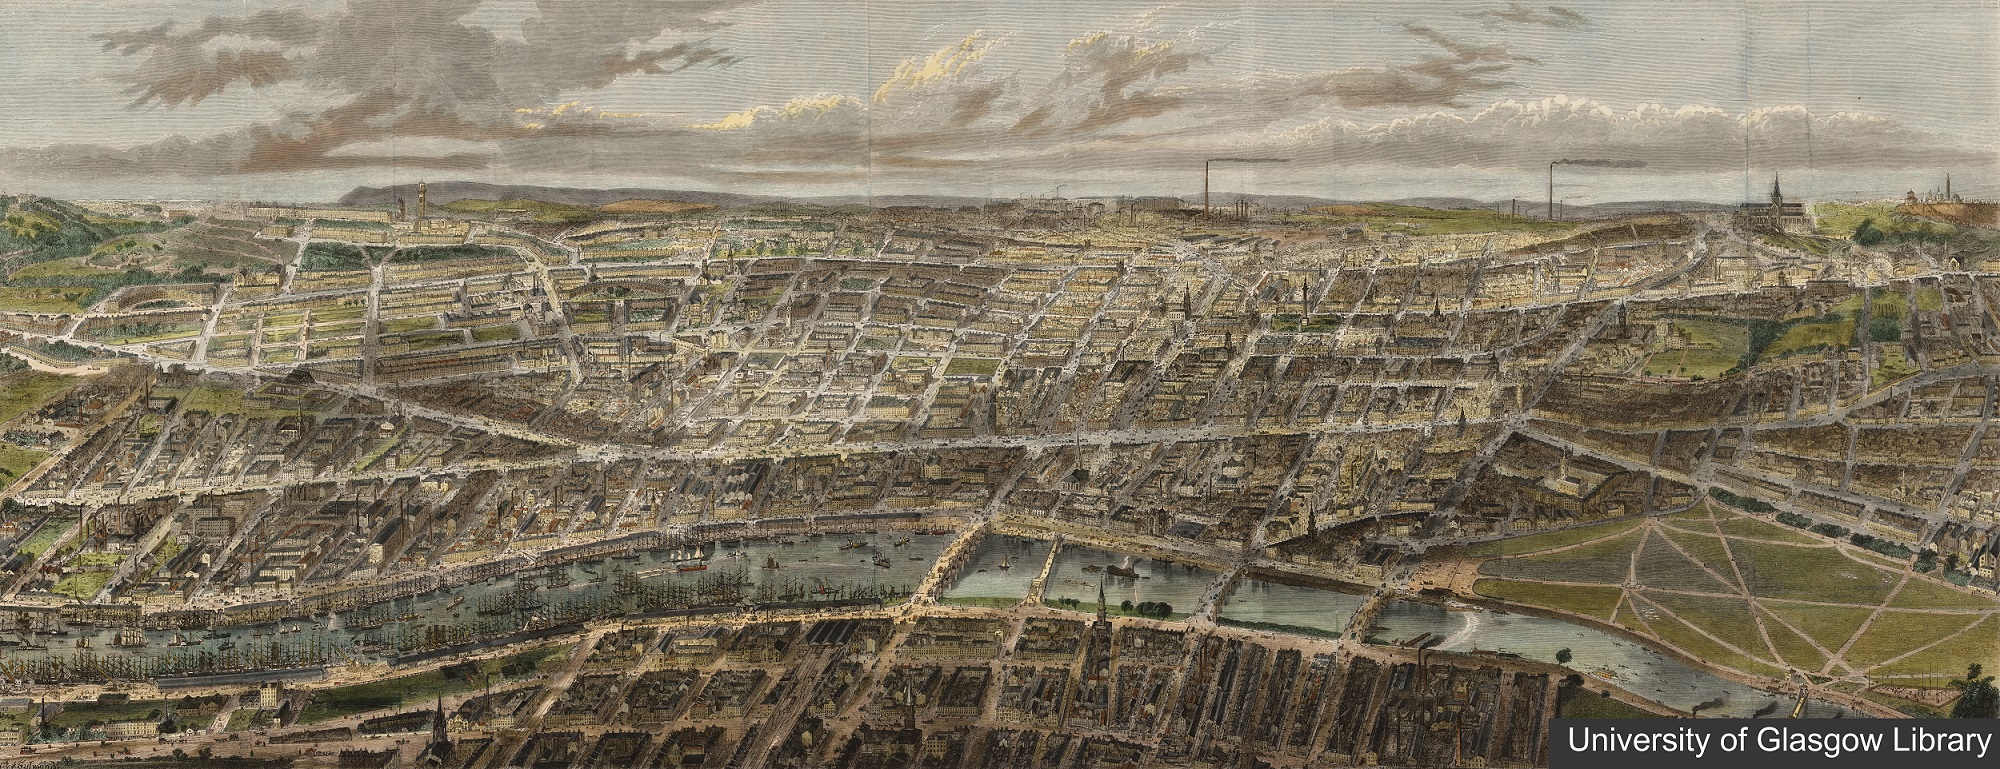 Birds eye view of Glasgow from the University of Glasgow Library archive.